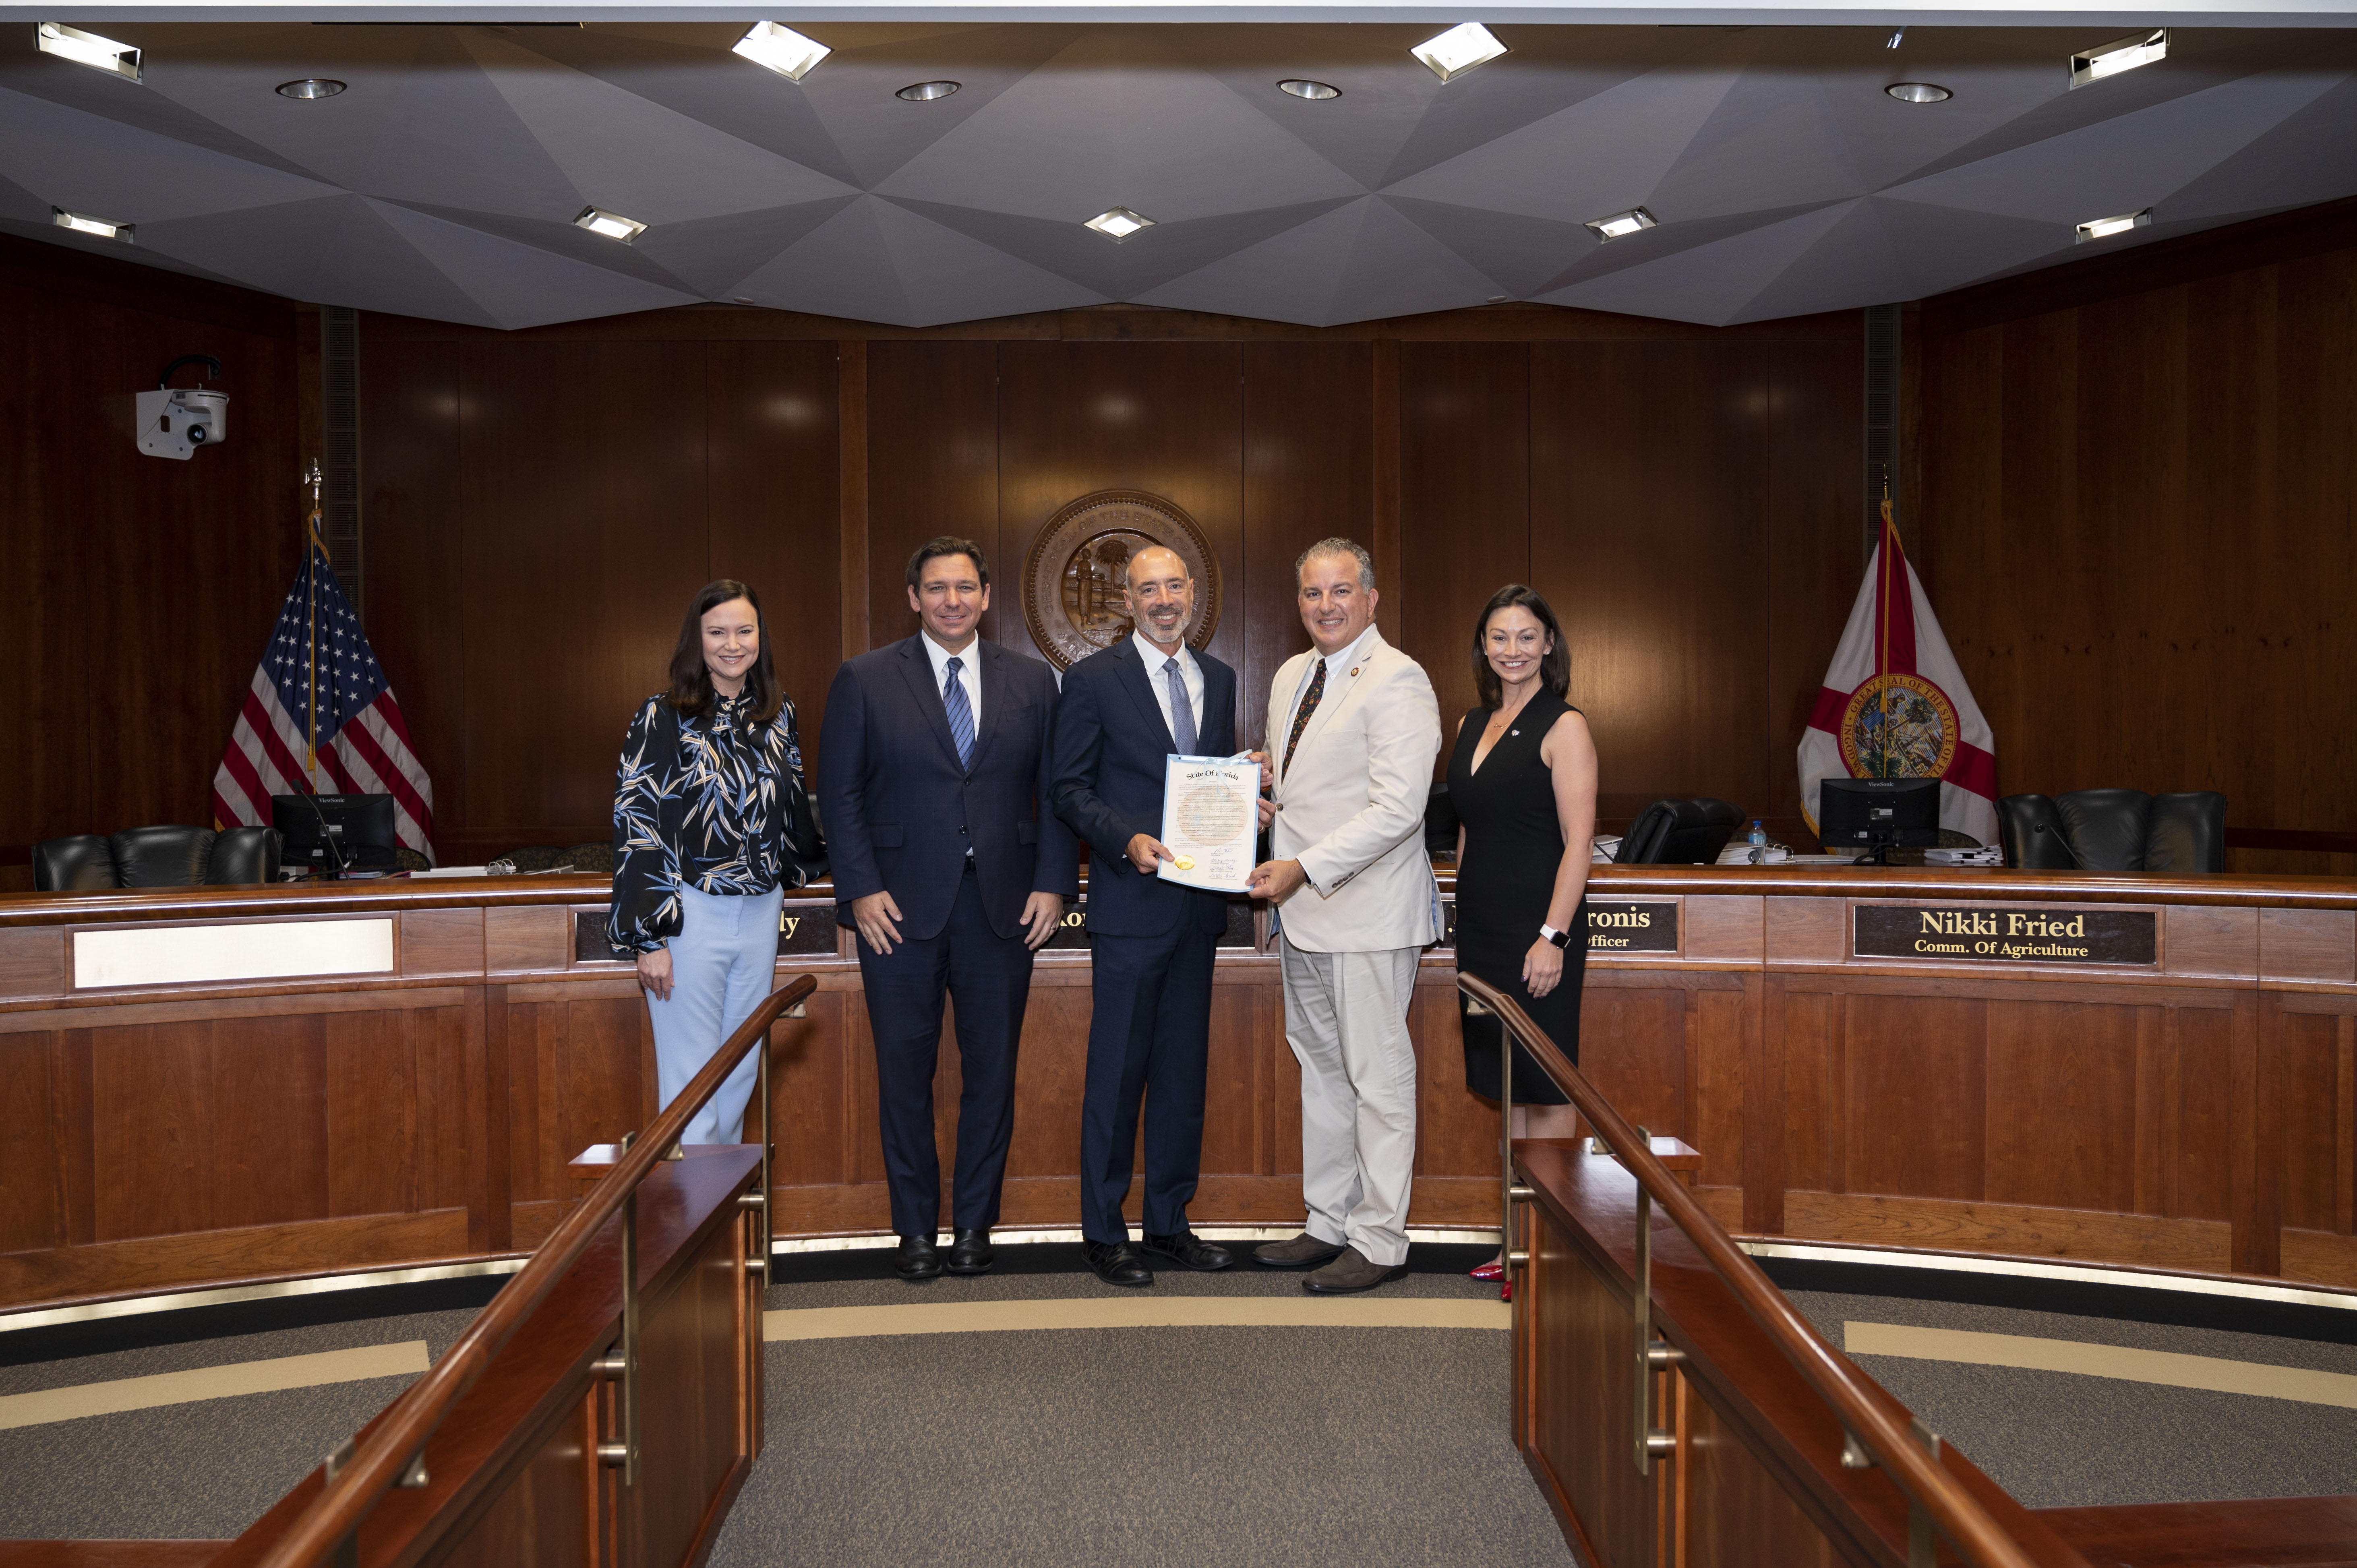 Jimmy Patronis presented a resolution honoring Florida Supreme Court Justice Alan Lawson